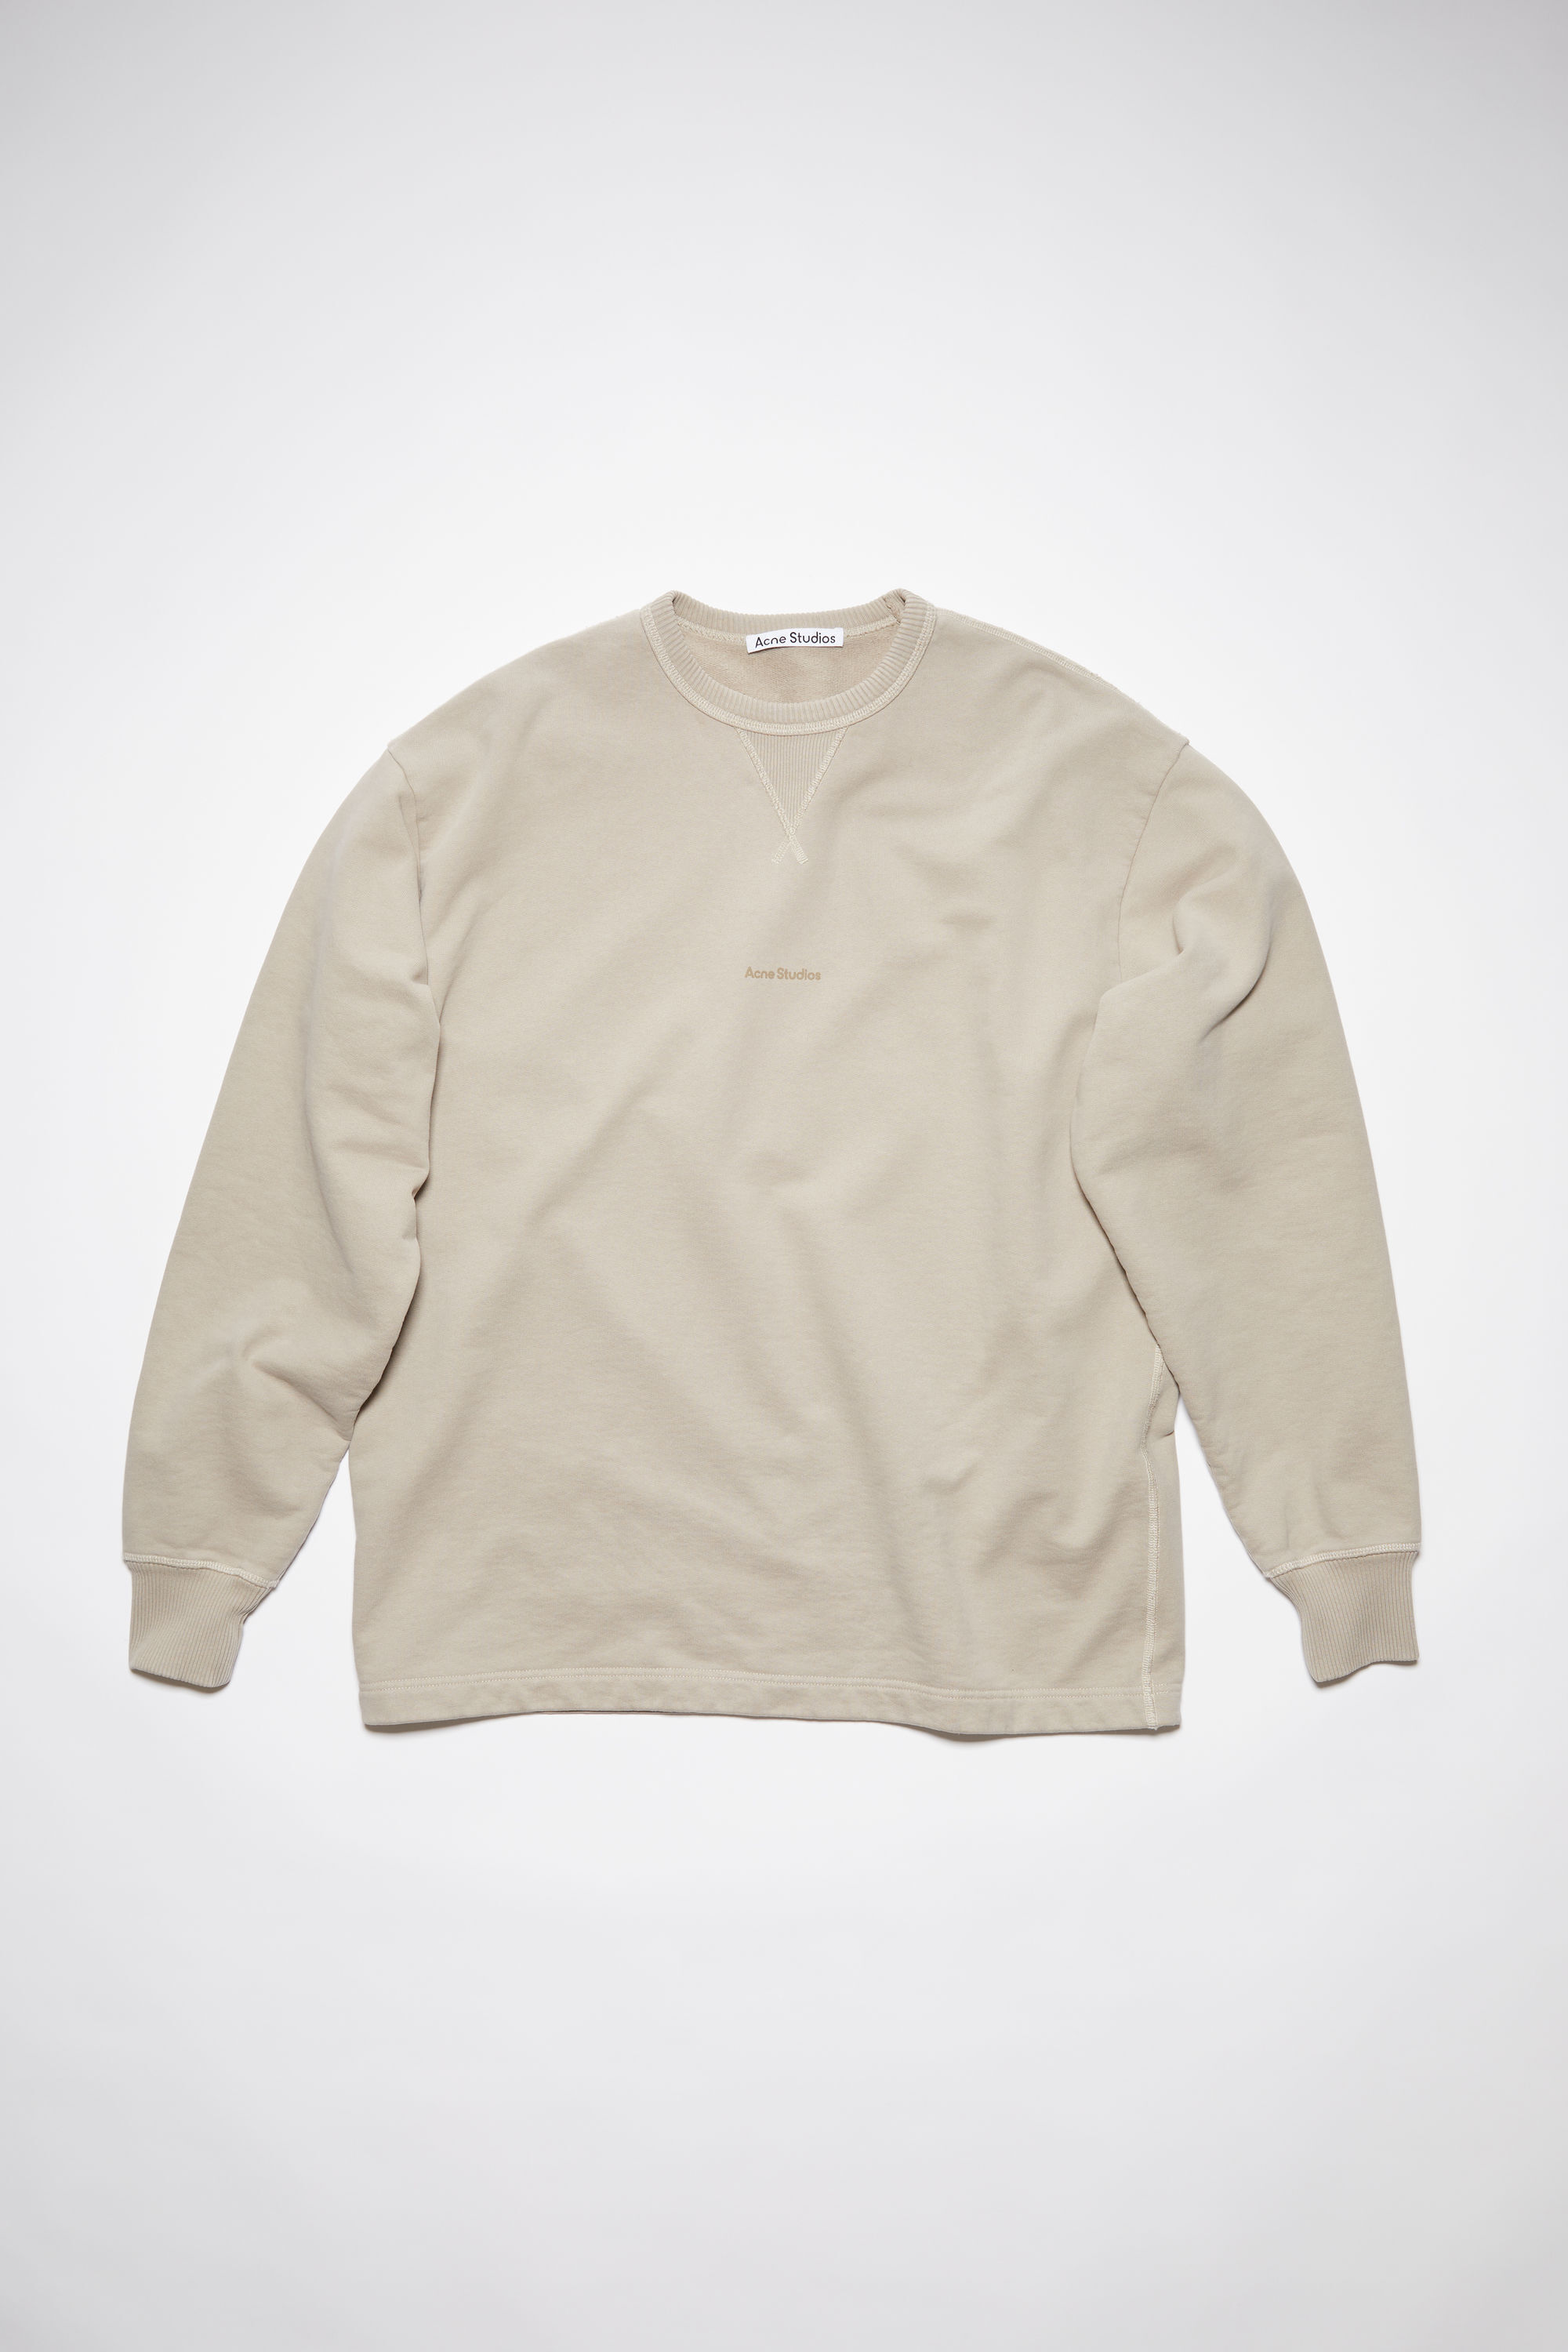 Acne Studios - Stamp logo sweater - Oyster grey